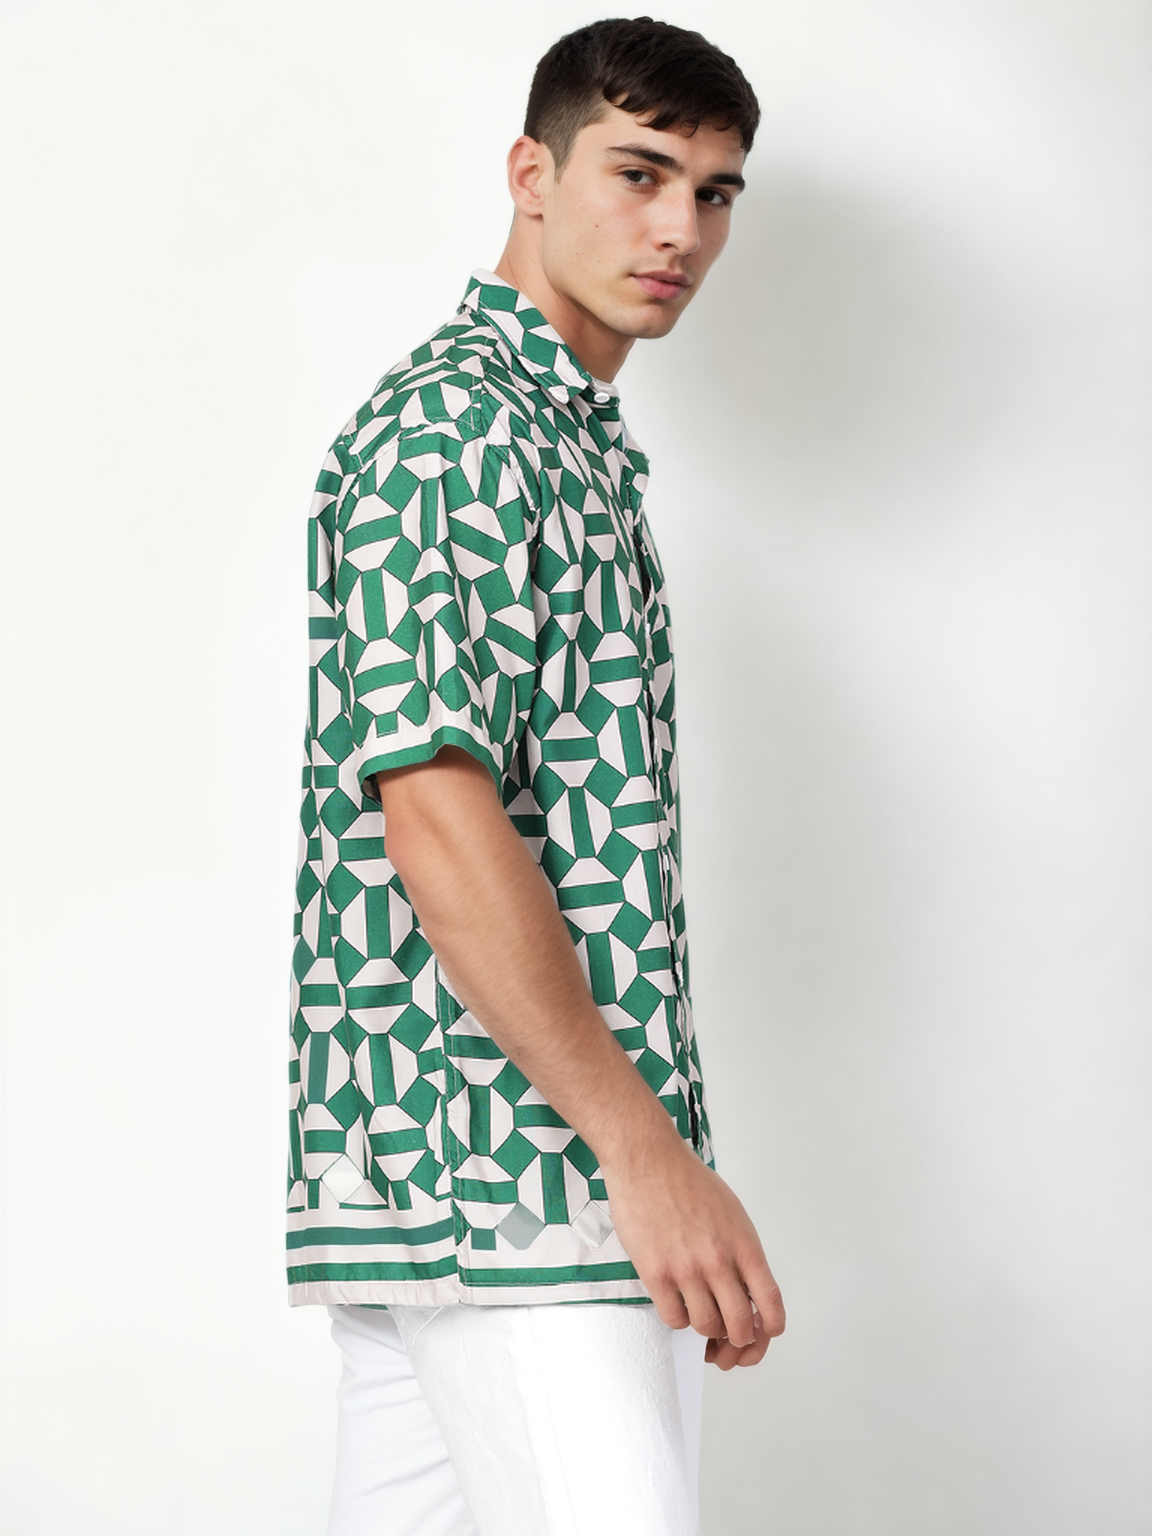 Hemsters Geometric Print Green & Off White color Half Sleeve Relaxed Shirt For Mens